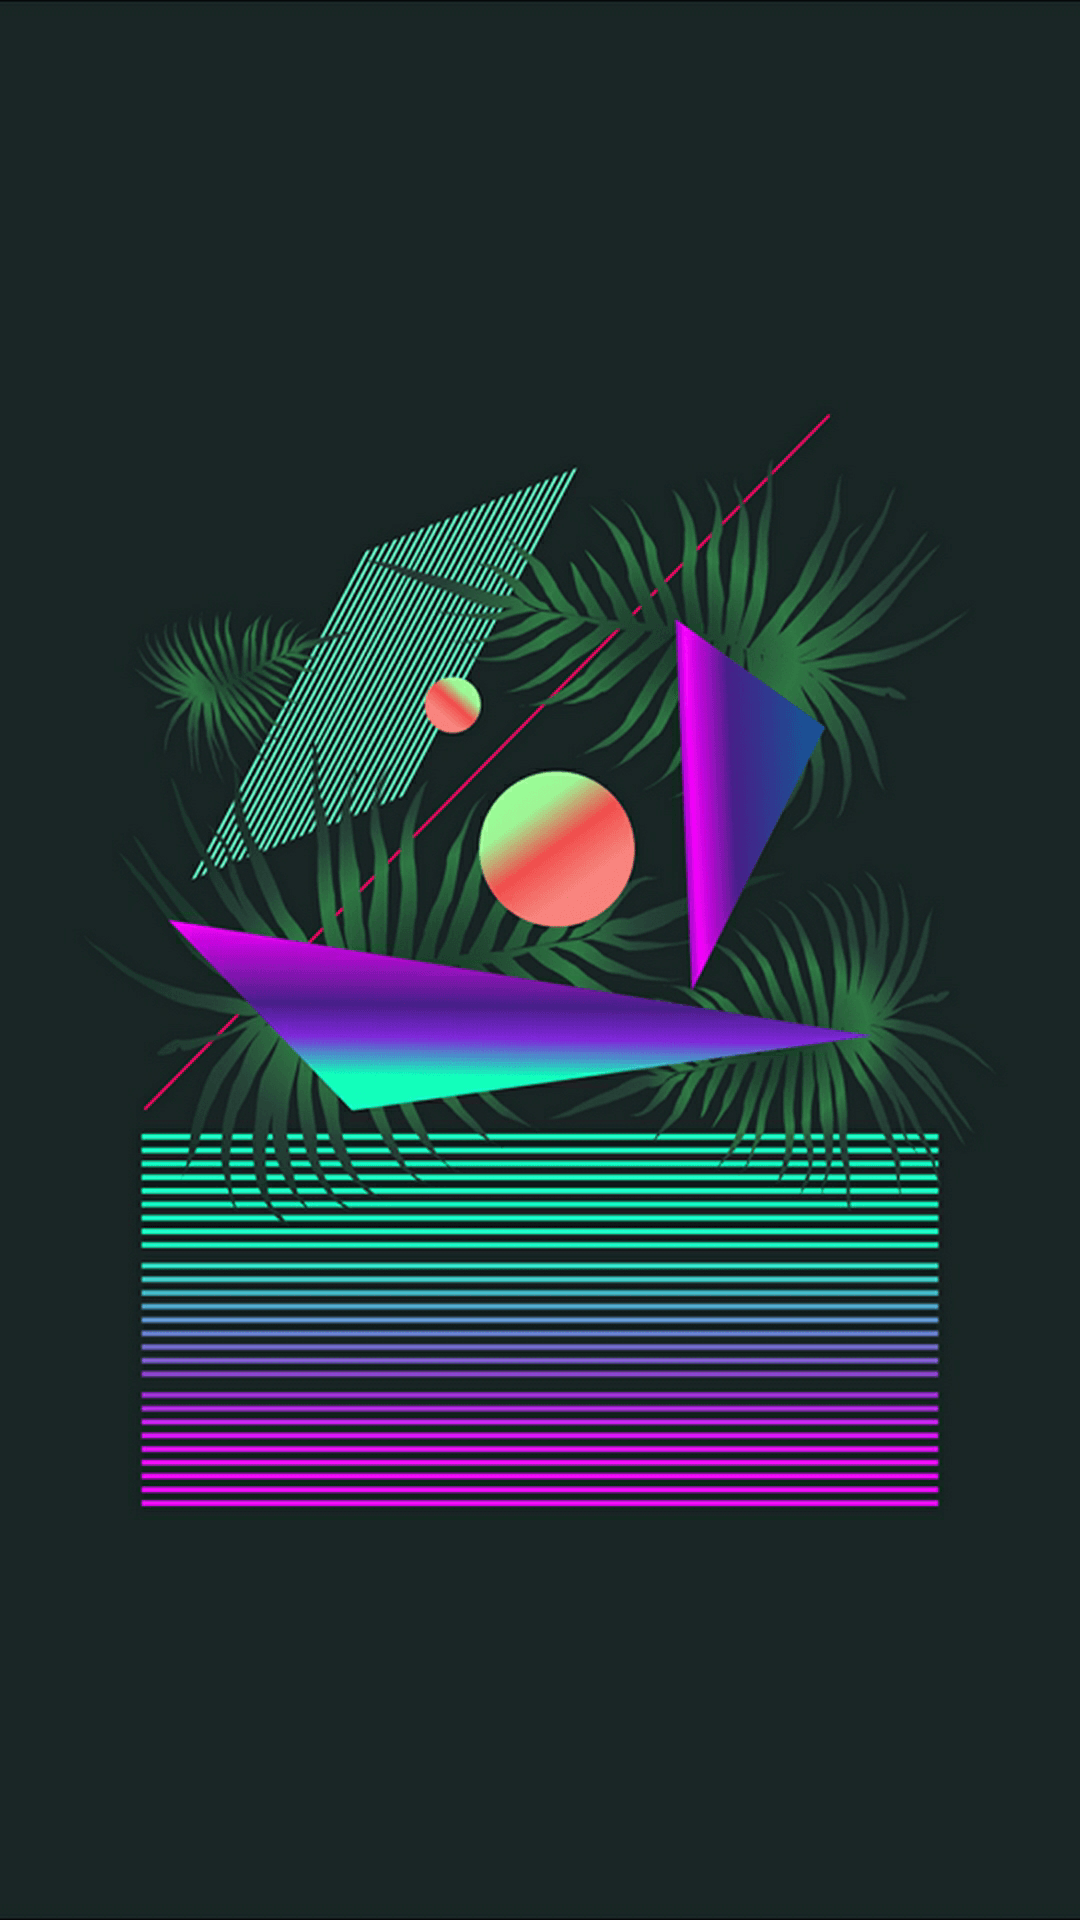 A colorful abstract image with palm leaves and an object - Phone